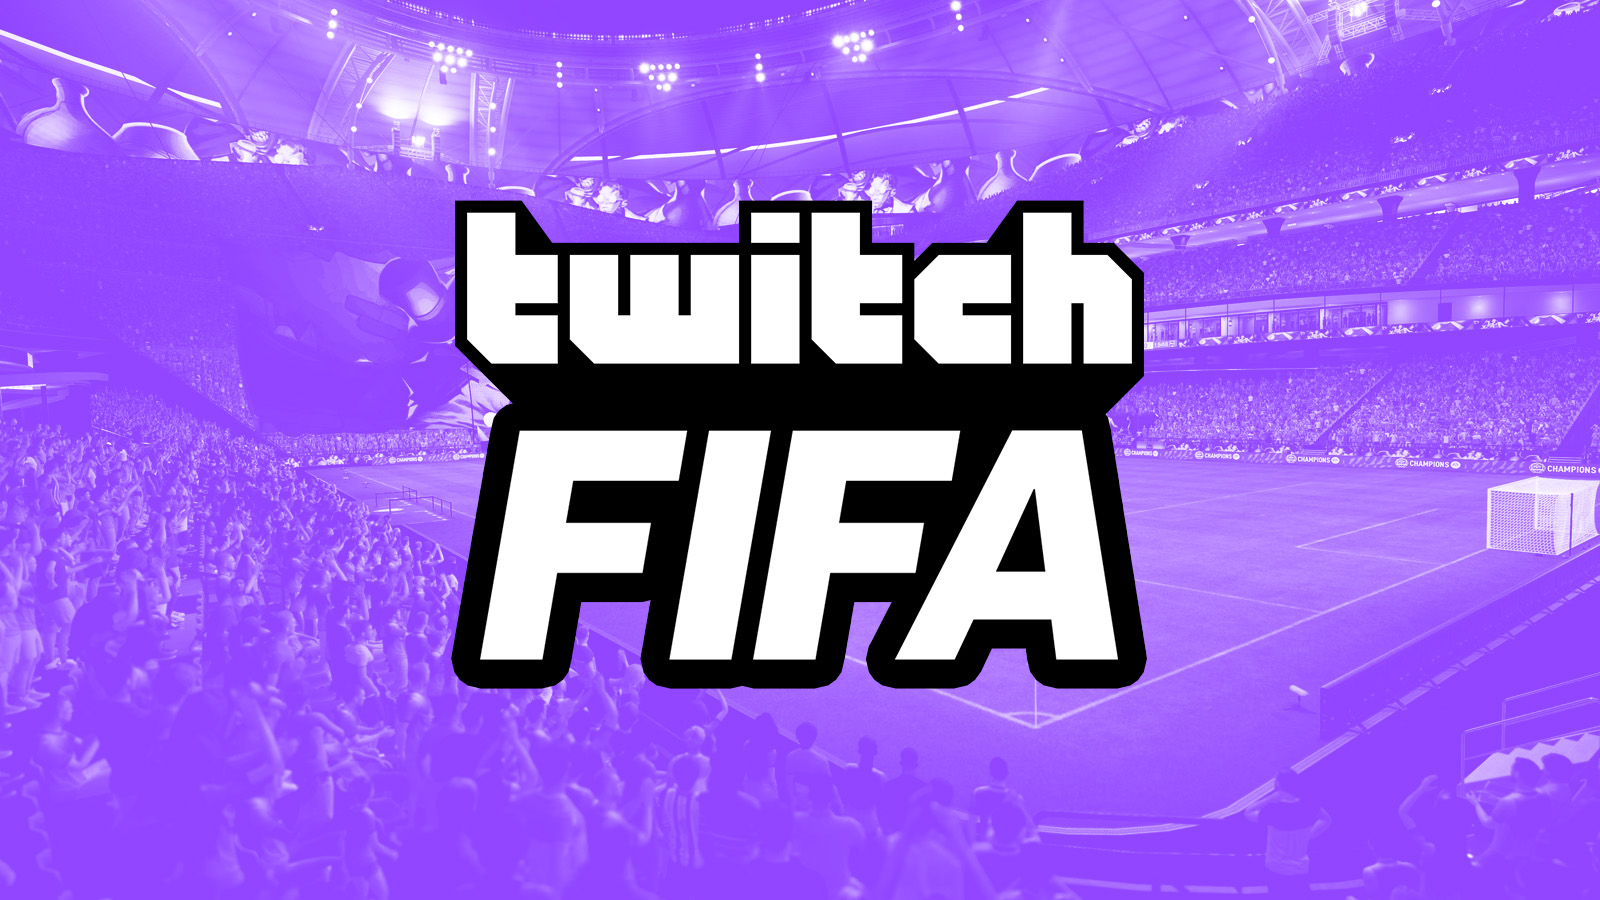 Become an EAFC 24 Founder! twitch.tv/lowmi for live content! #fifa23 #